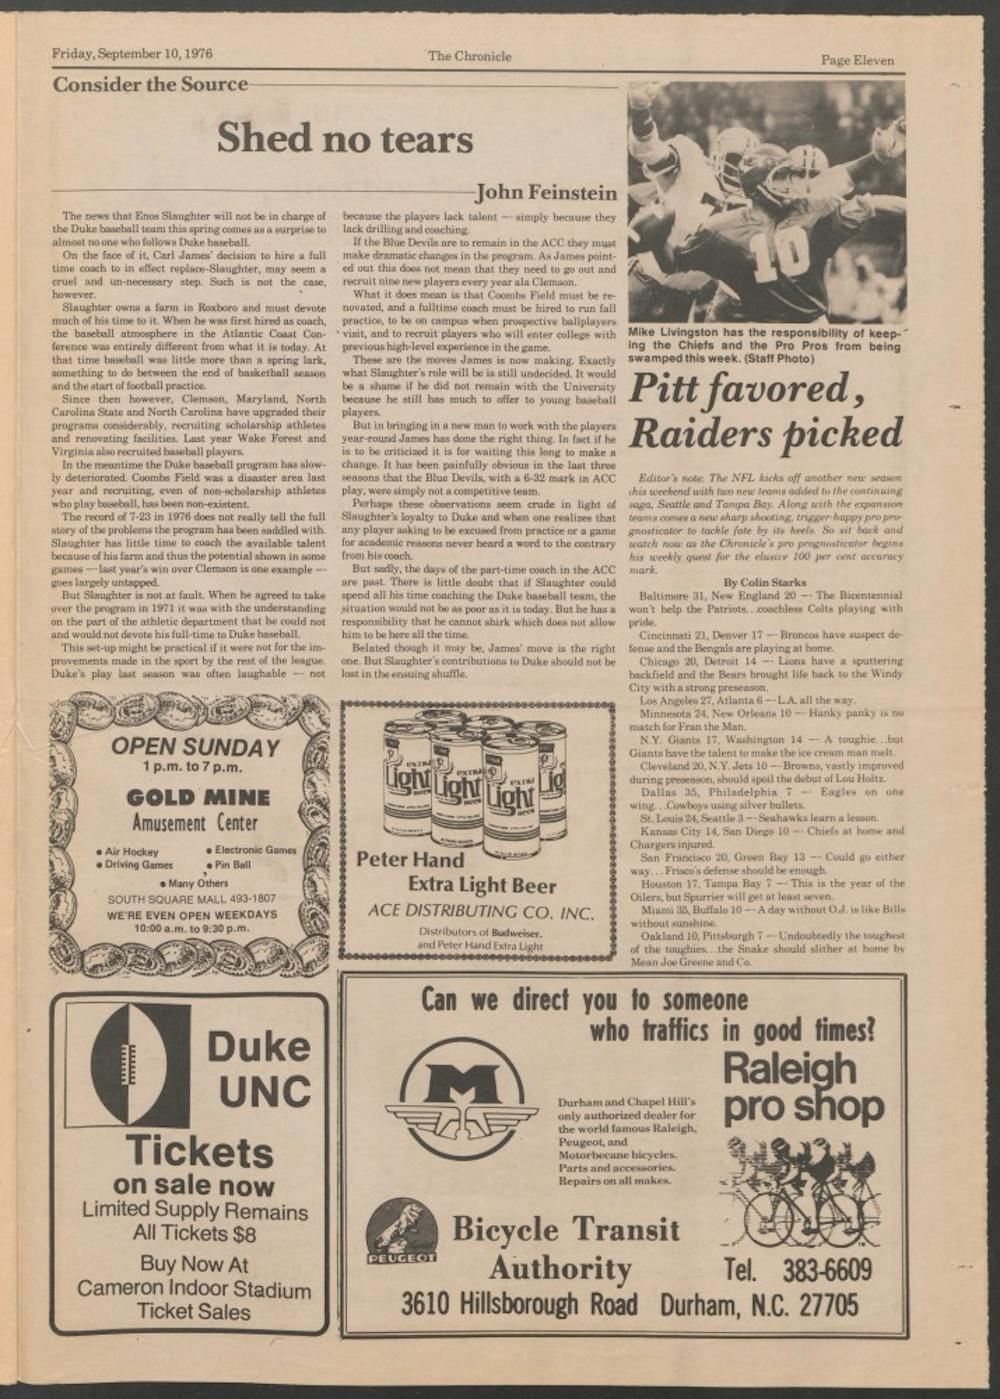 A column by John Feinstein in a 1977 edition of The Chronicle discusses Enos Slaughter's&nbsp;dual responsibilities to Duke's baseball team and to his farm.